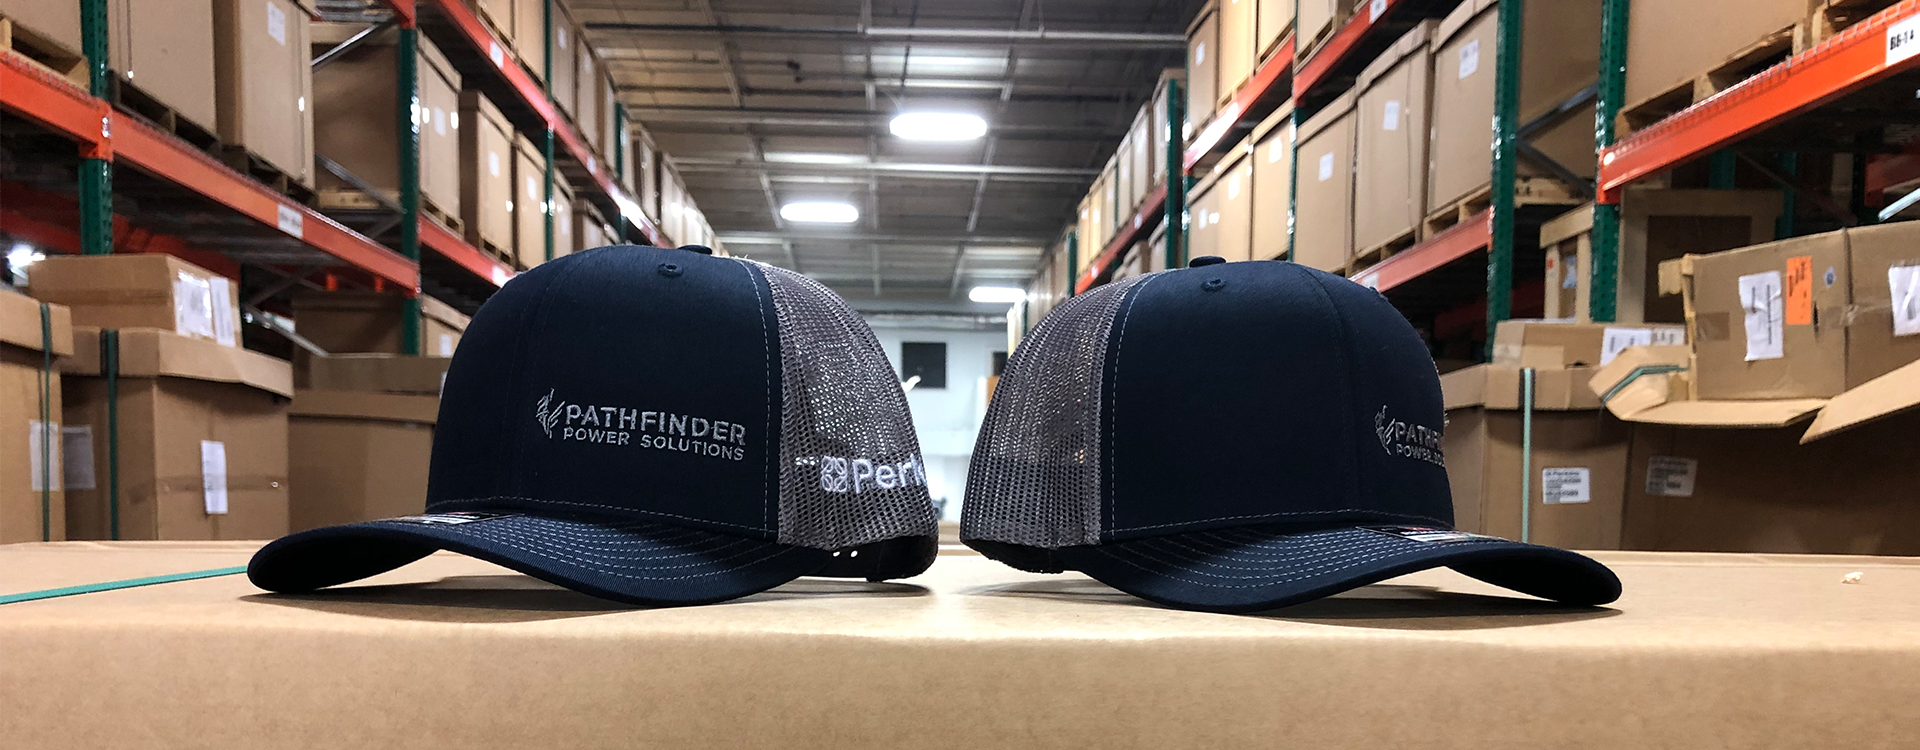 Free Pathfinder Power hats available upon registering your engine!